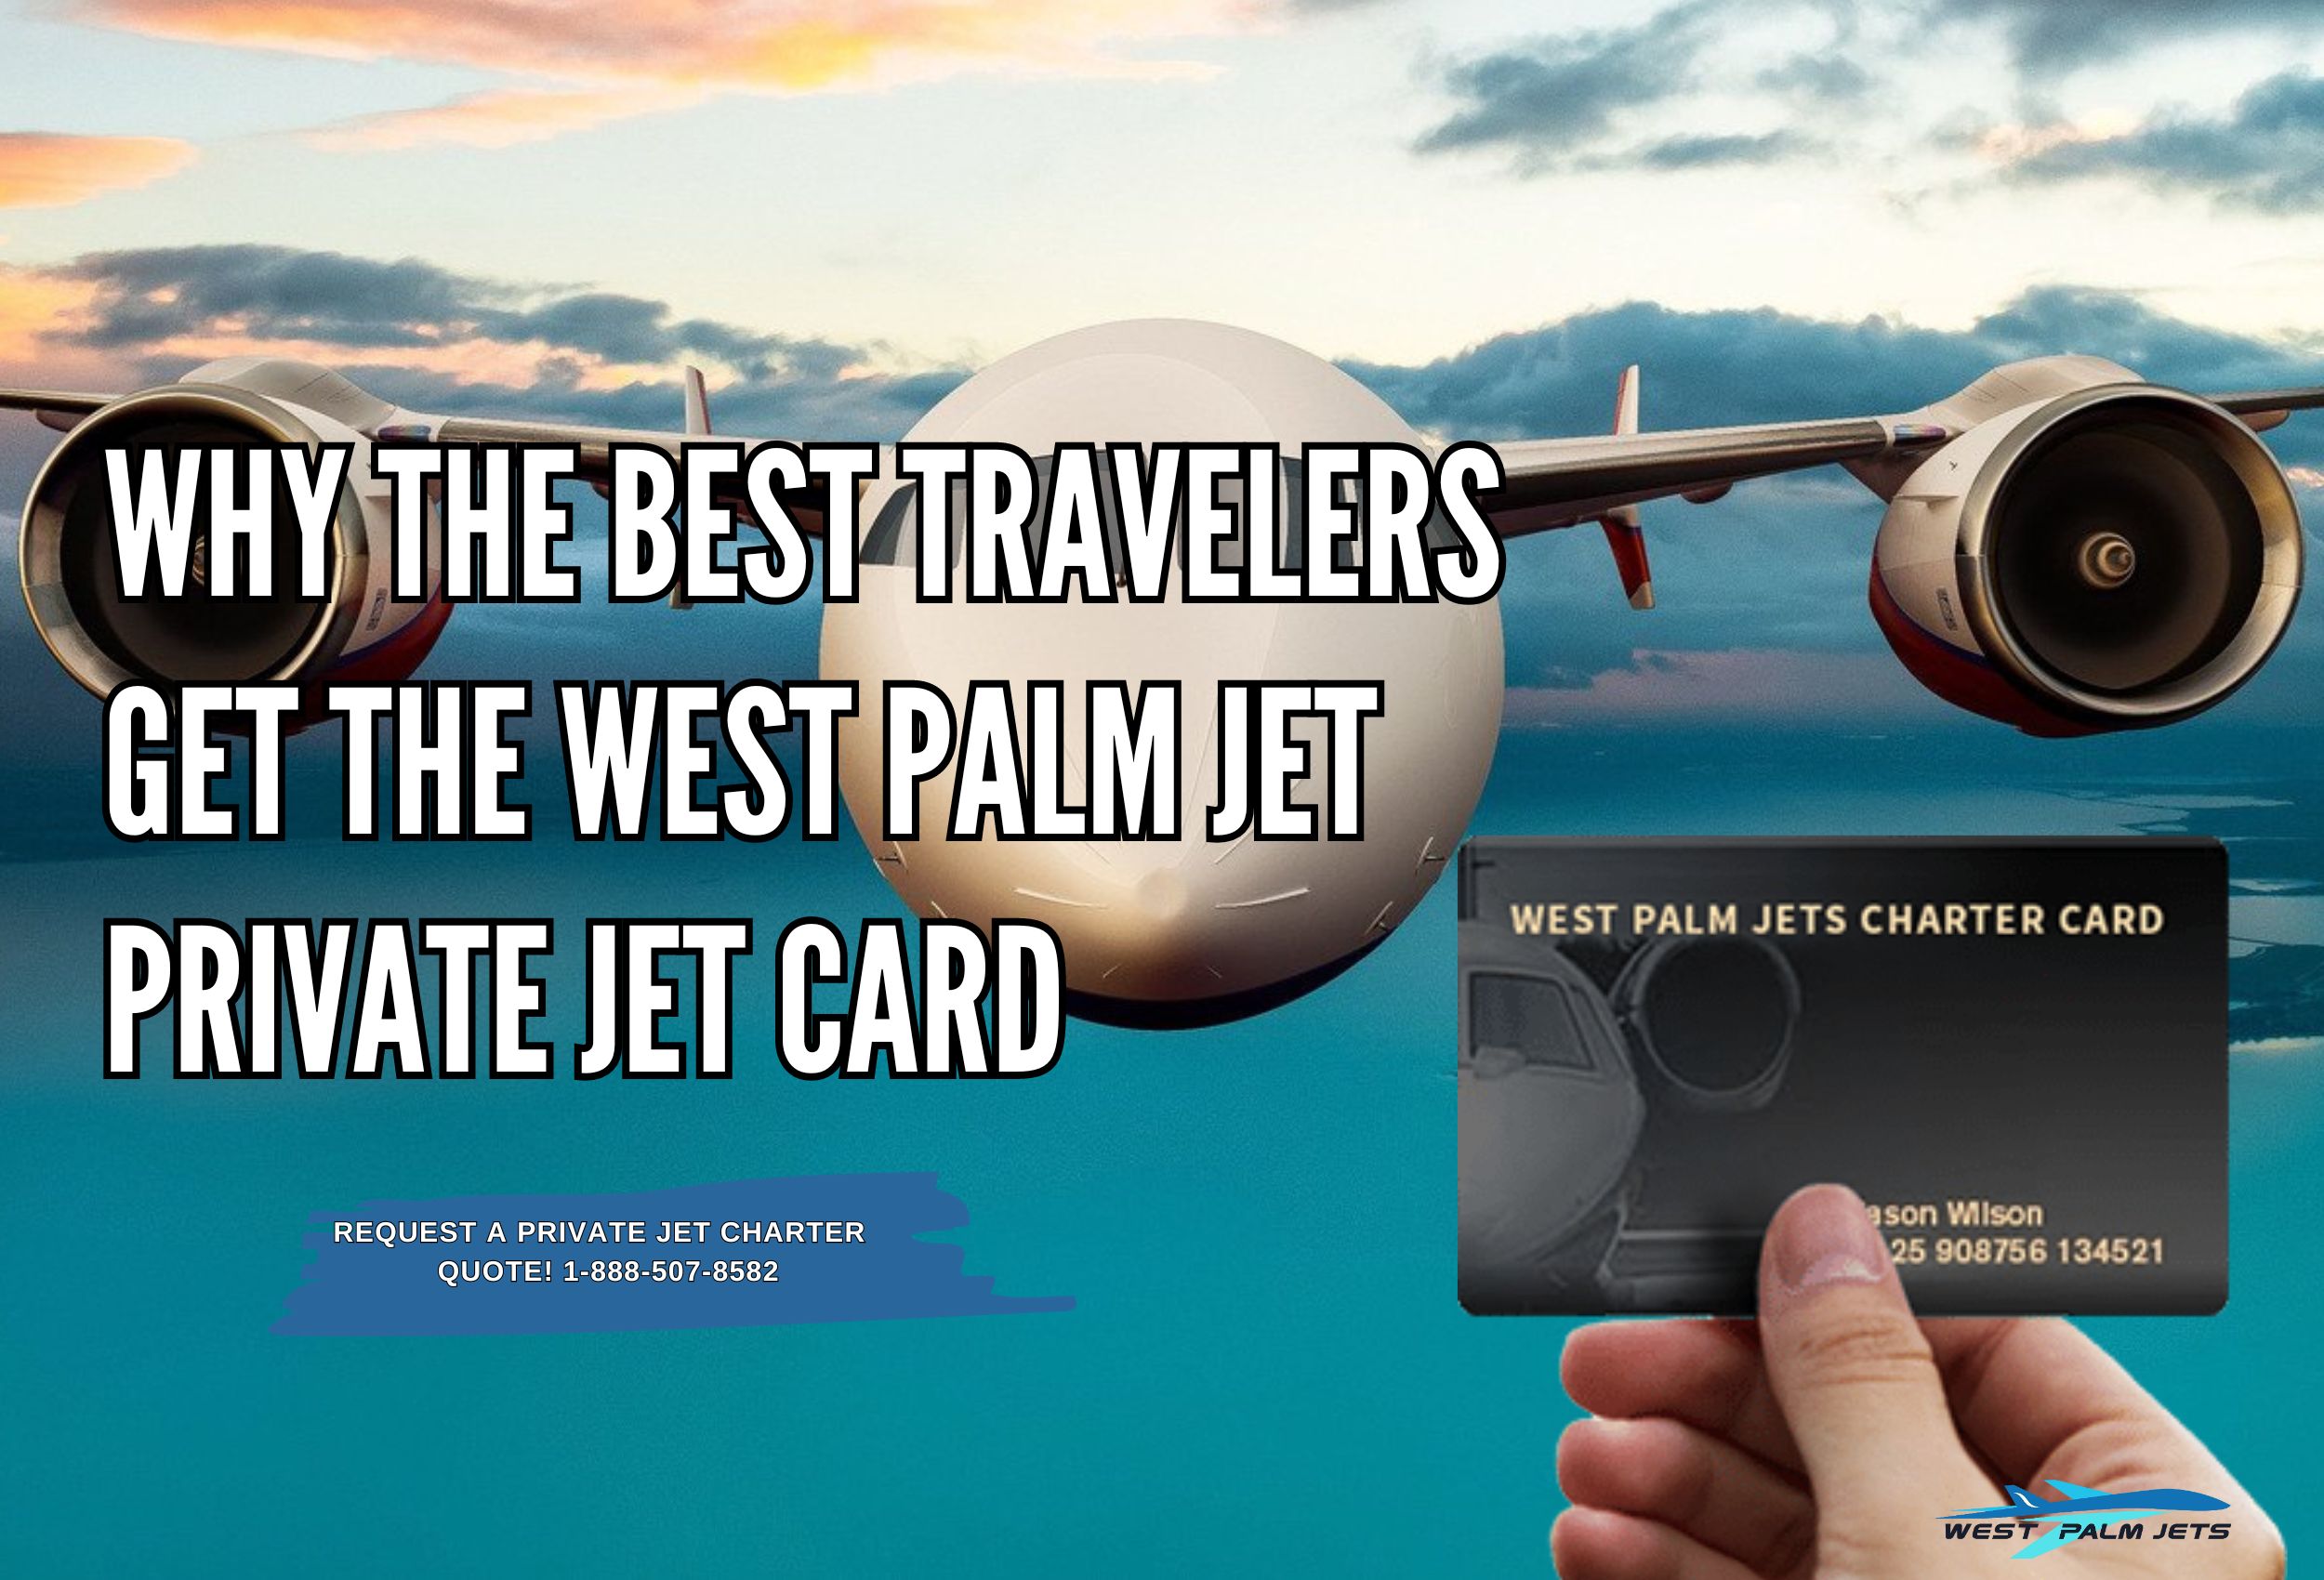 Why Best Travelers Get The West Palm Jet Private Jet Card